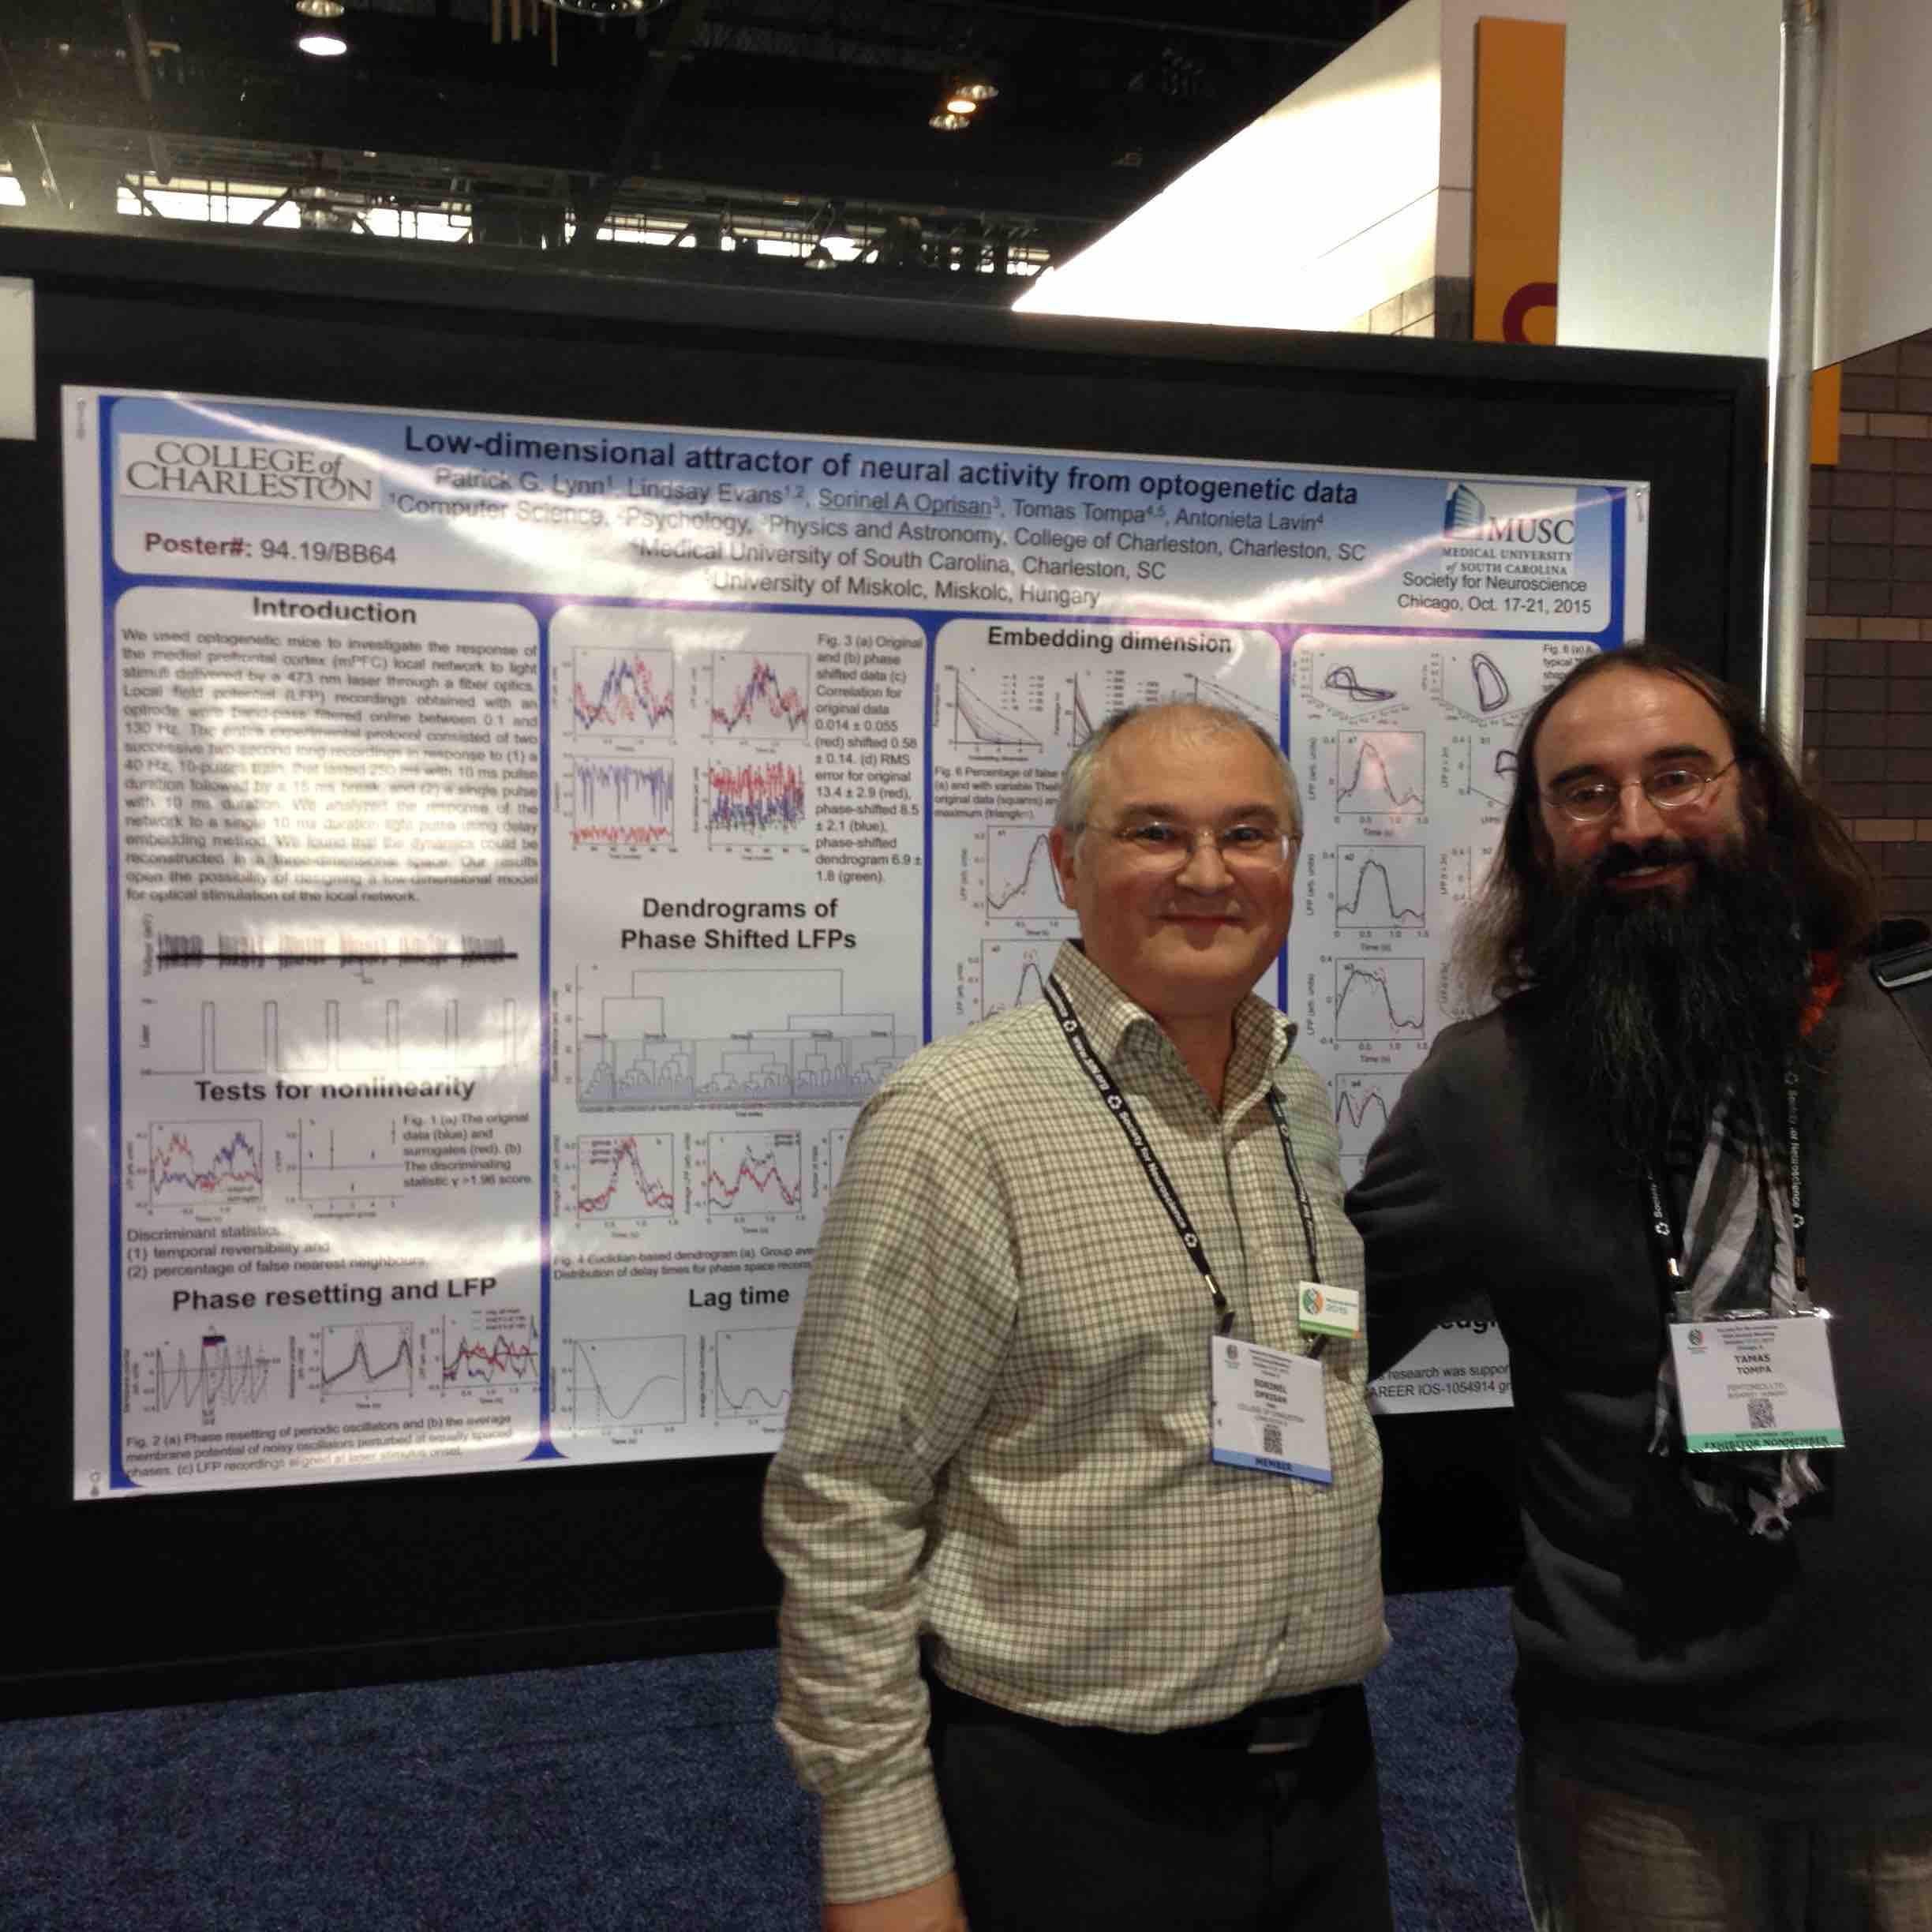 Drs. Oprisan and Tompa at SFN Conference 2015